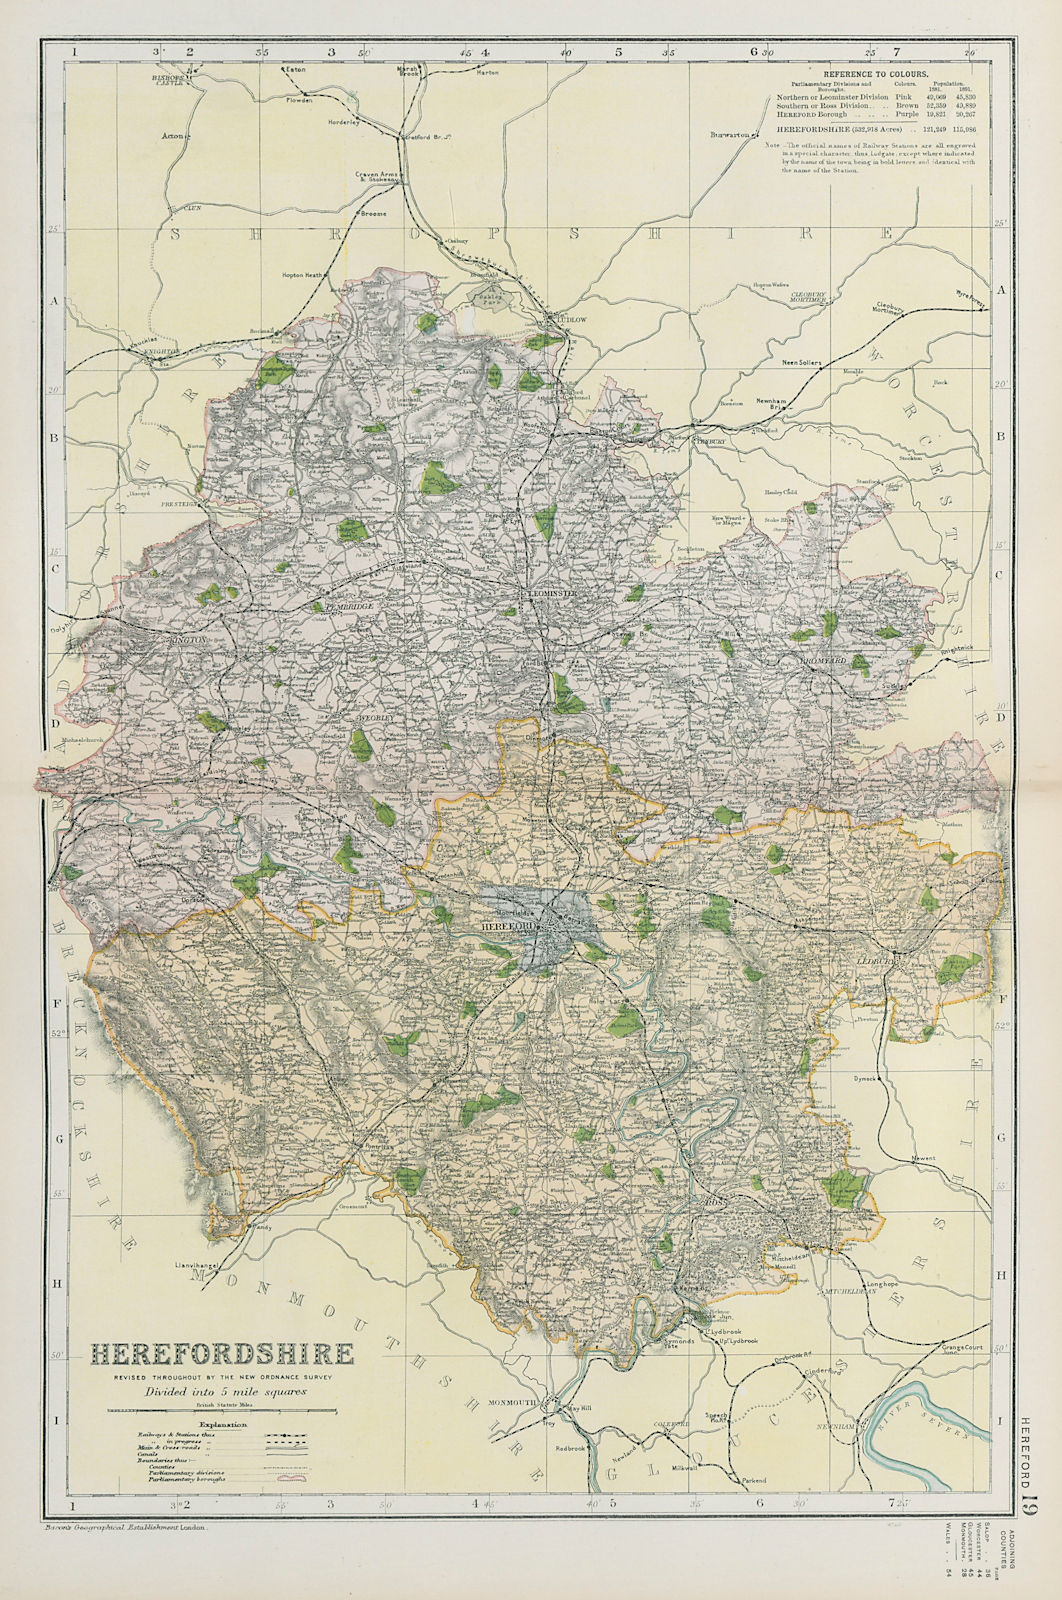 Associate Product HEREFORDSHIRE. Showing Parliamentary divisions, boroughs & parks. BACON 1900 map